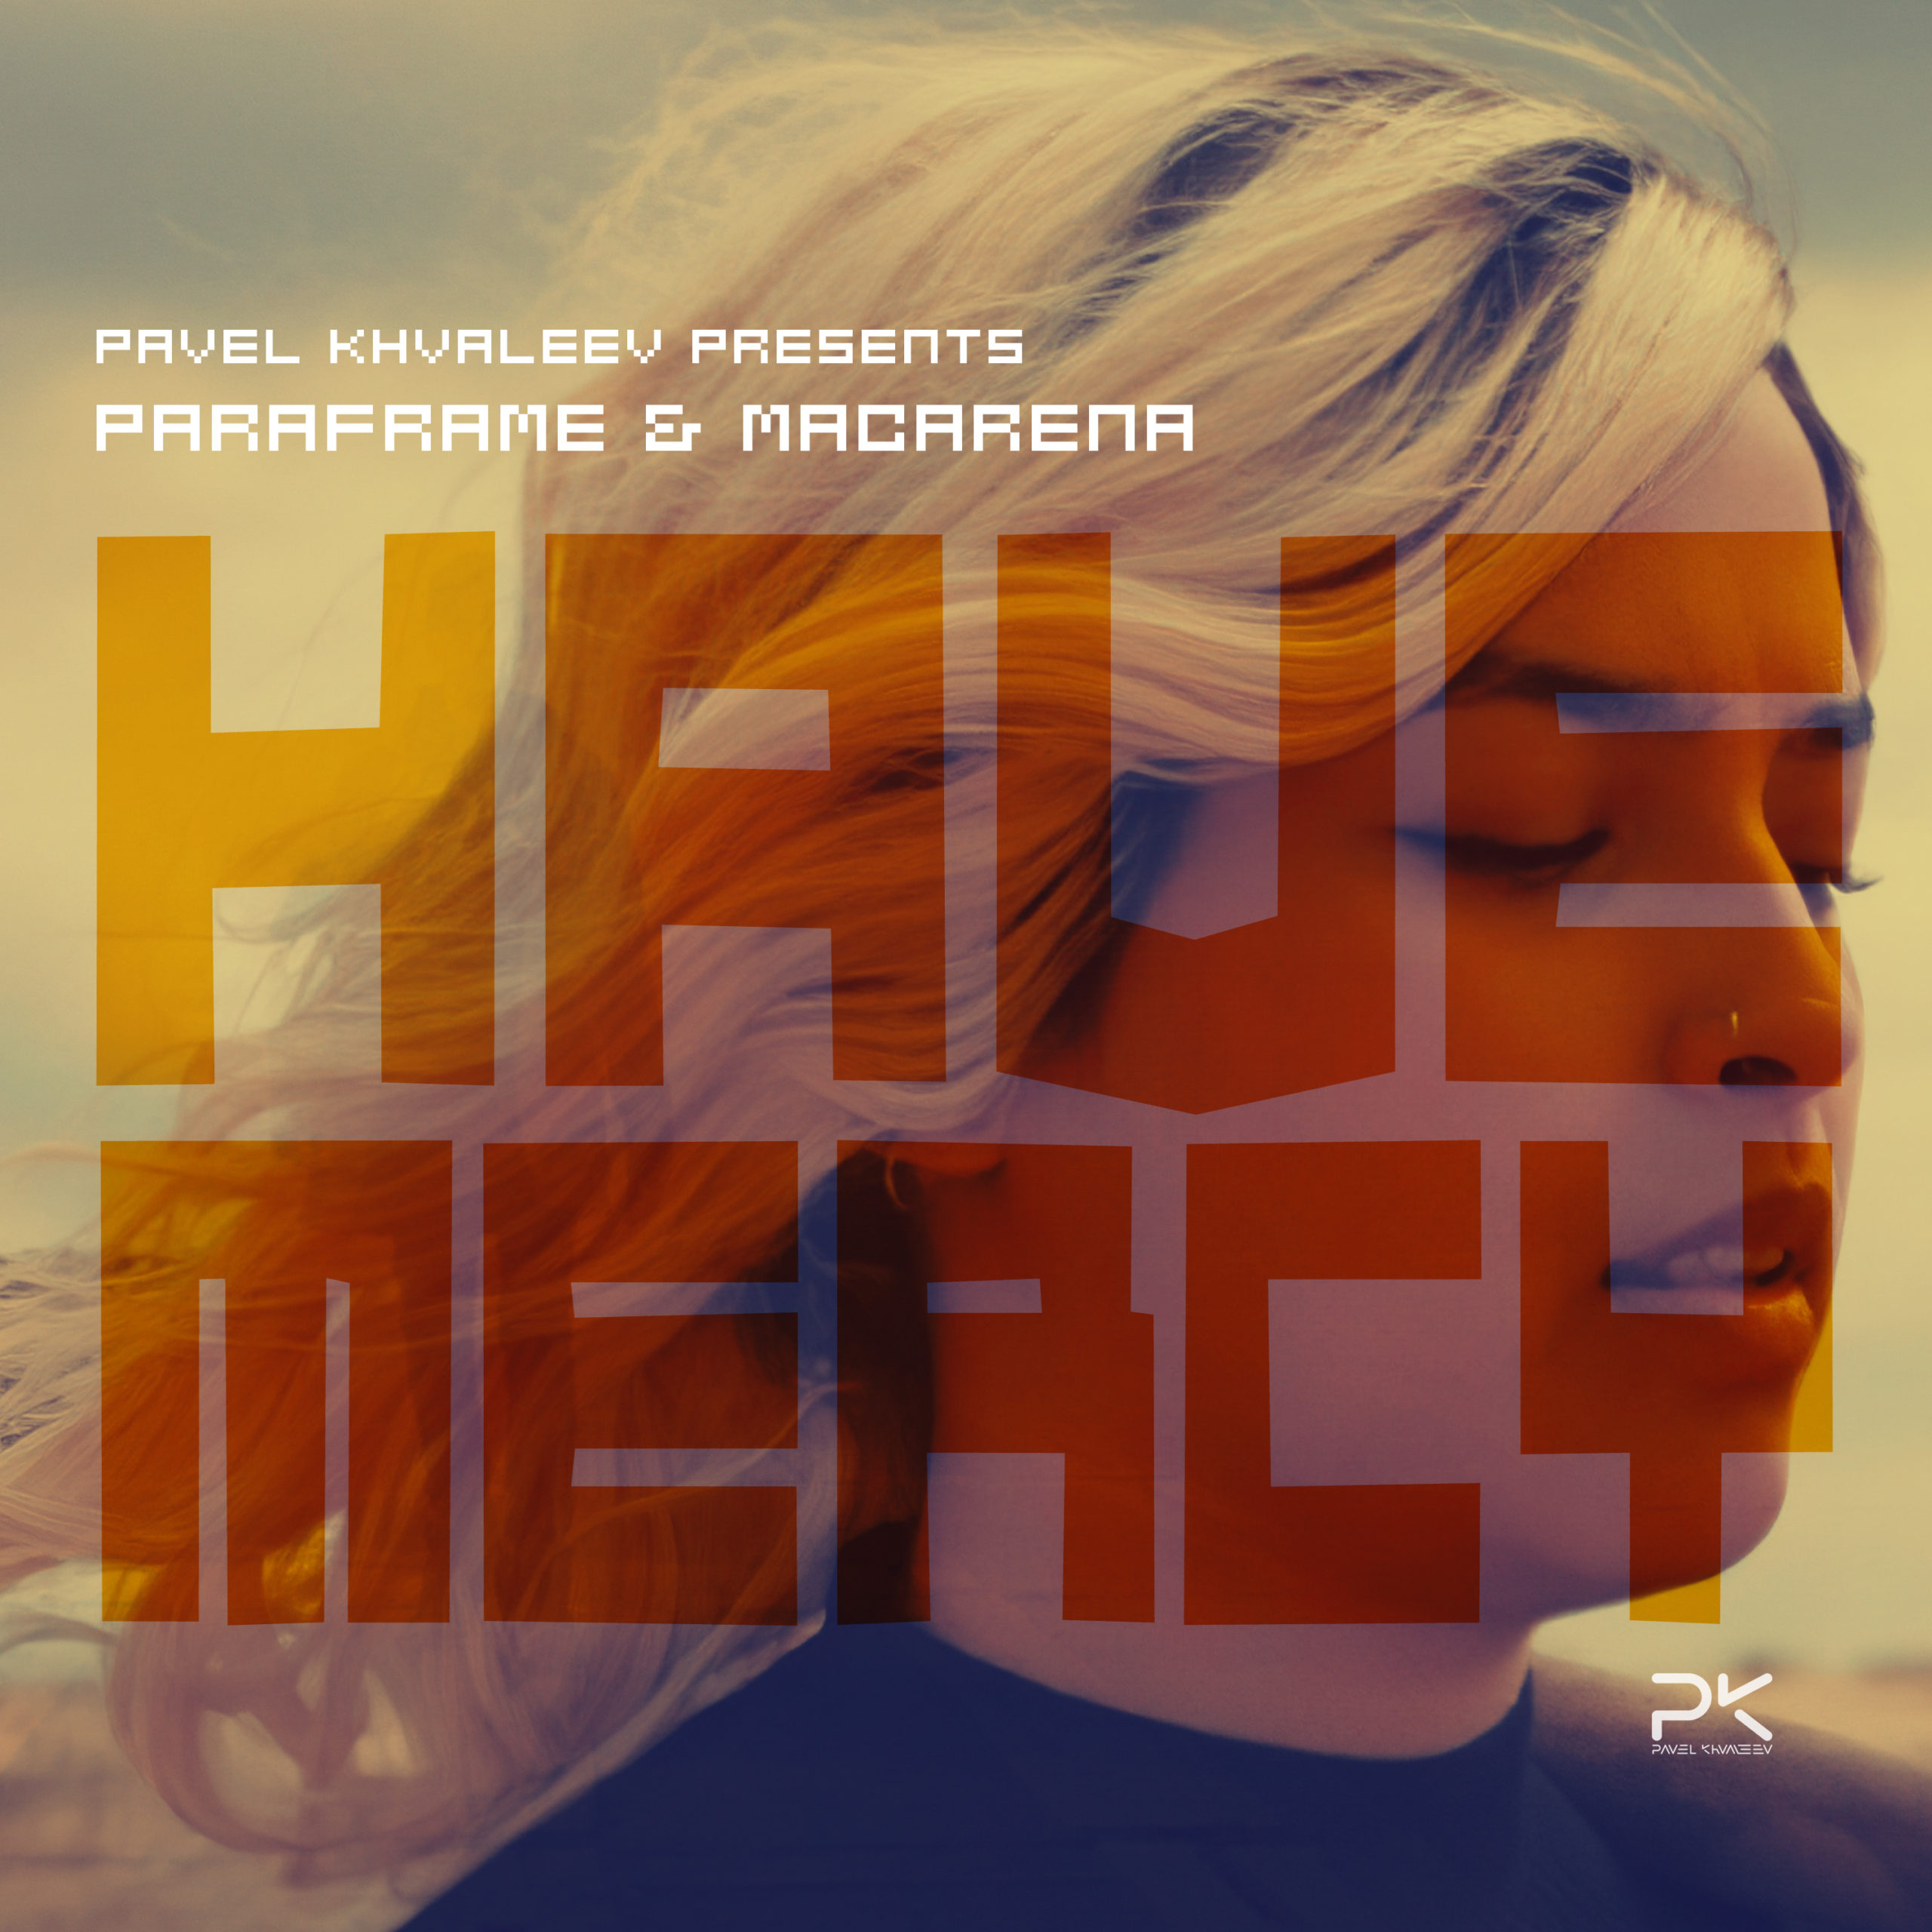 Pavel Khvaleev pres PARAFRAME and Macarena presents Have Mercy on Black Hole Recordings